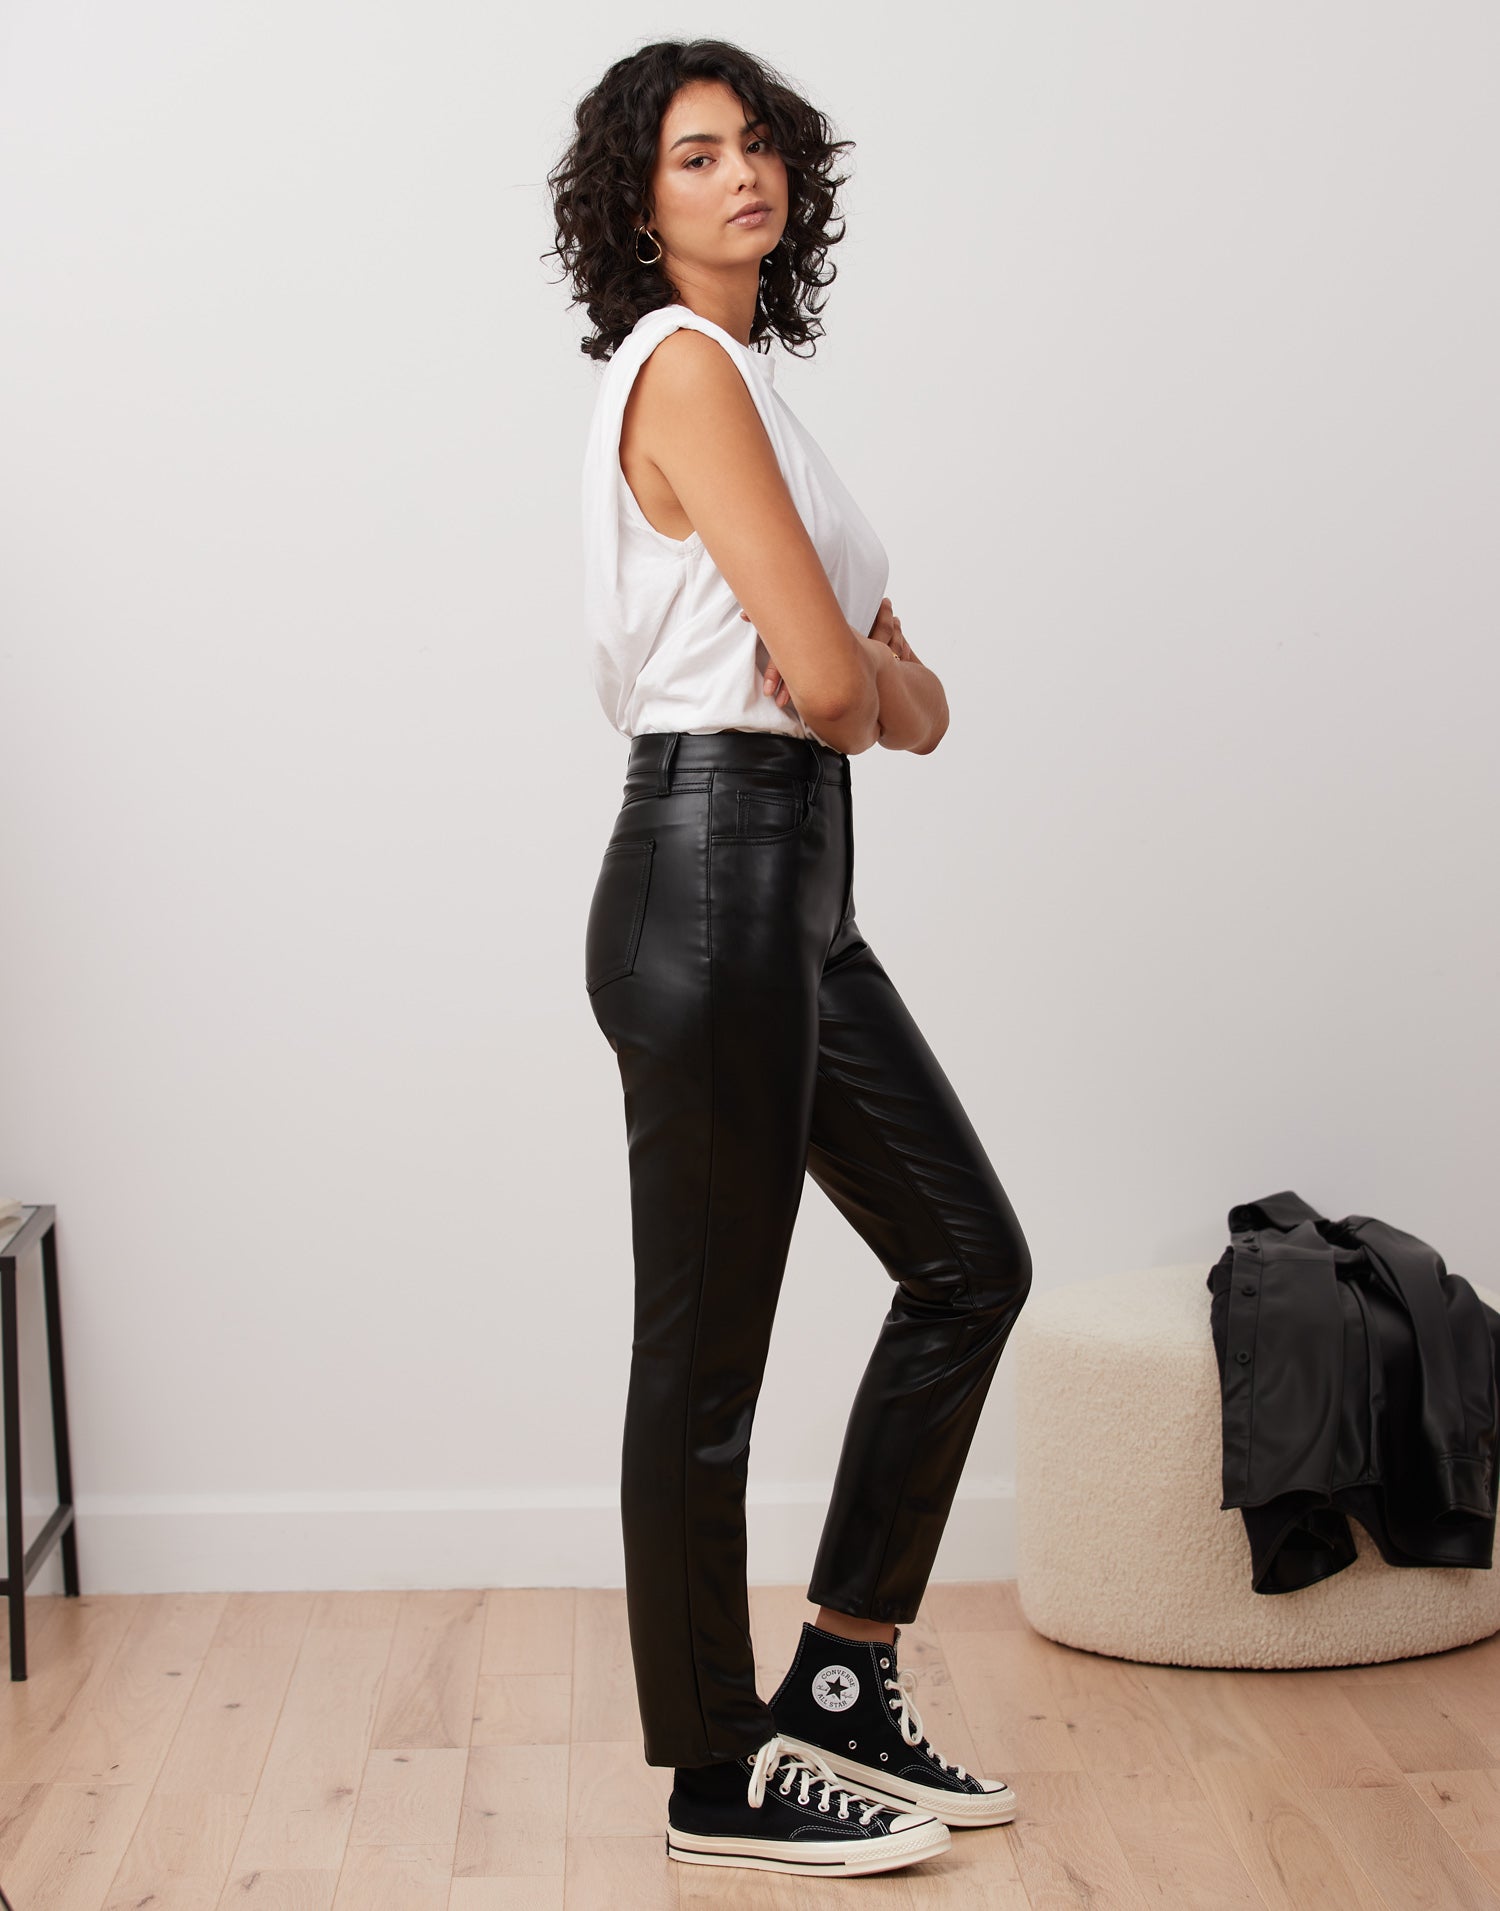 Classic Black Leather Pants - Jeans Style Leather Pants